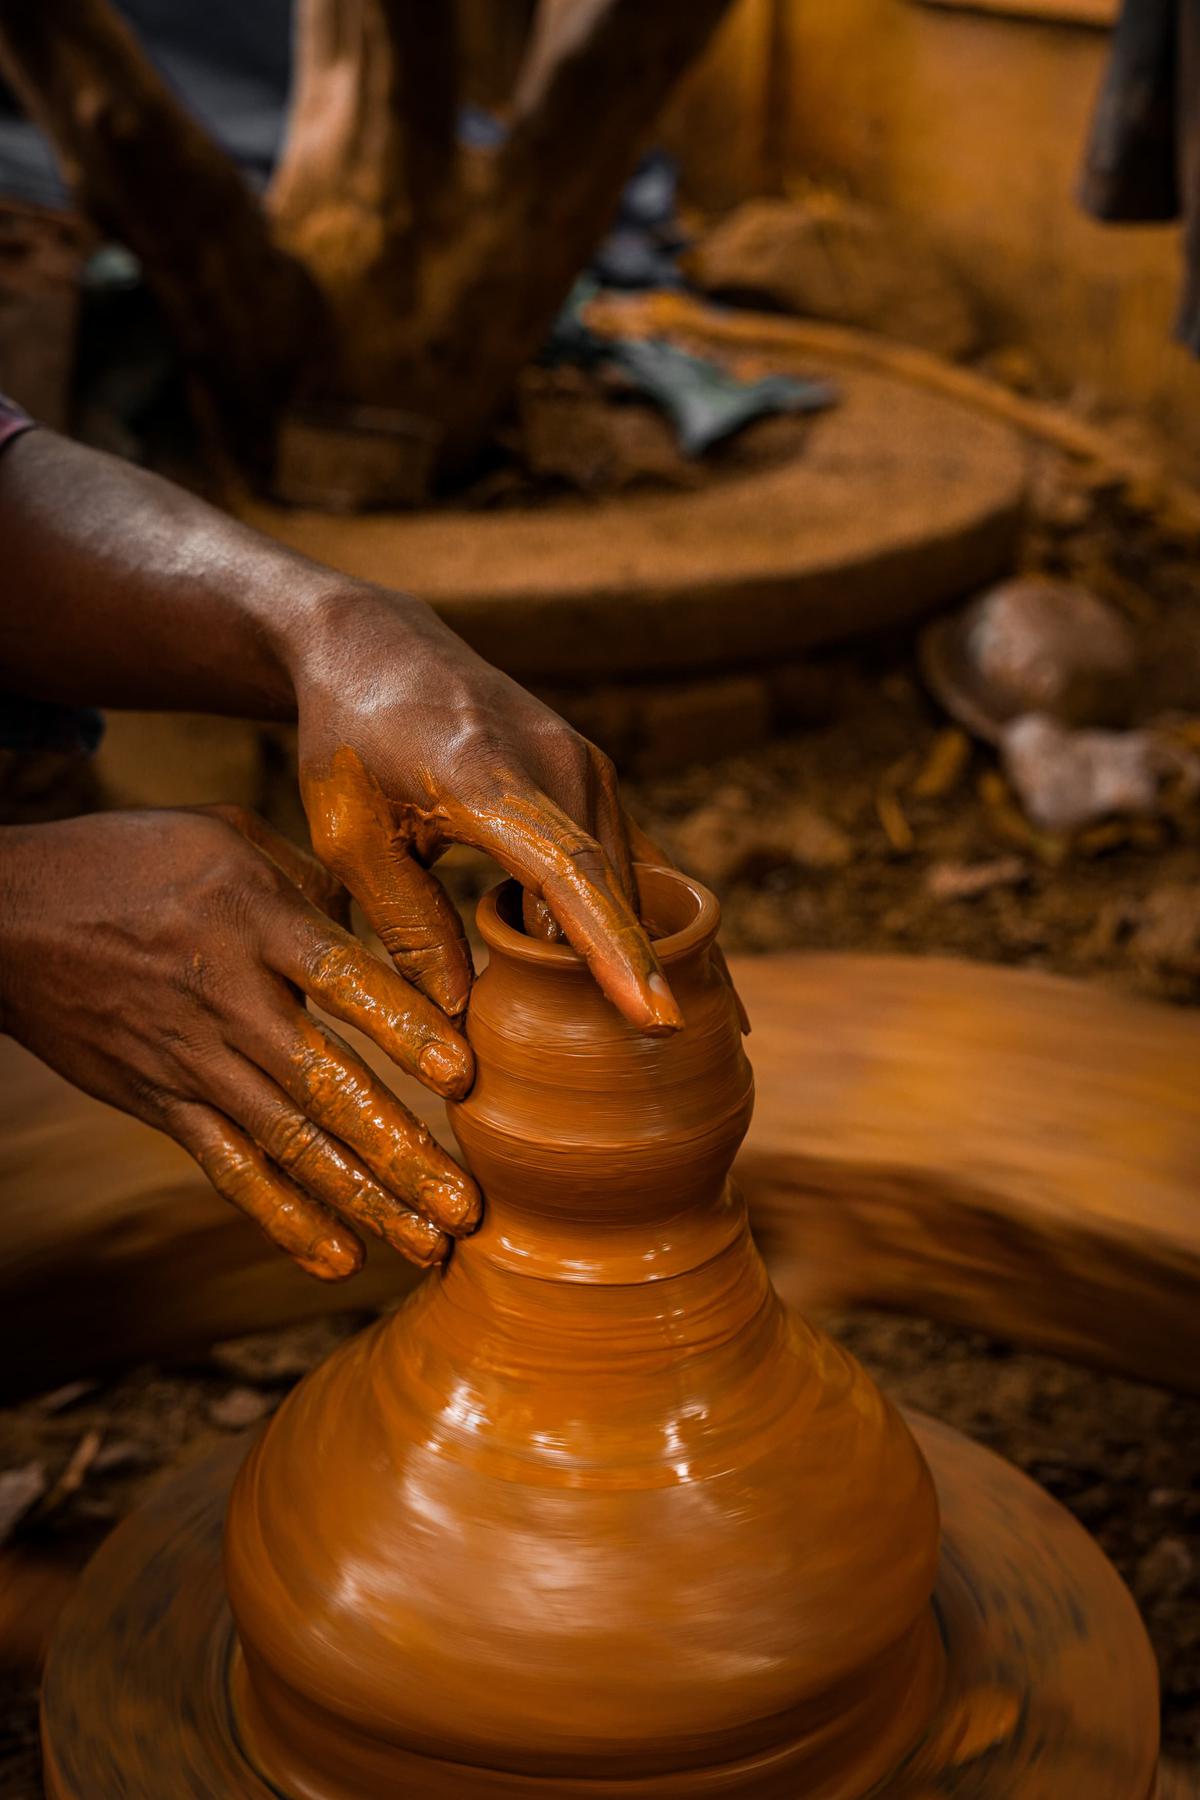 A potter working on the potter’s wheel. The picture taken by Kotni Deva Sahayam will be one of the exhibits at the photography exhibition in Andhra University in Visakhapatnam.